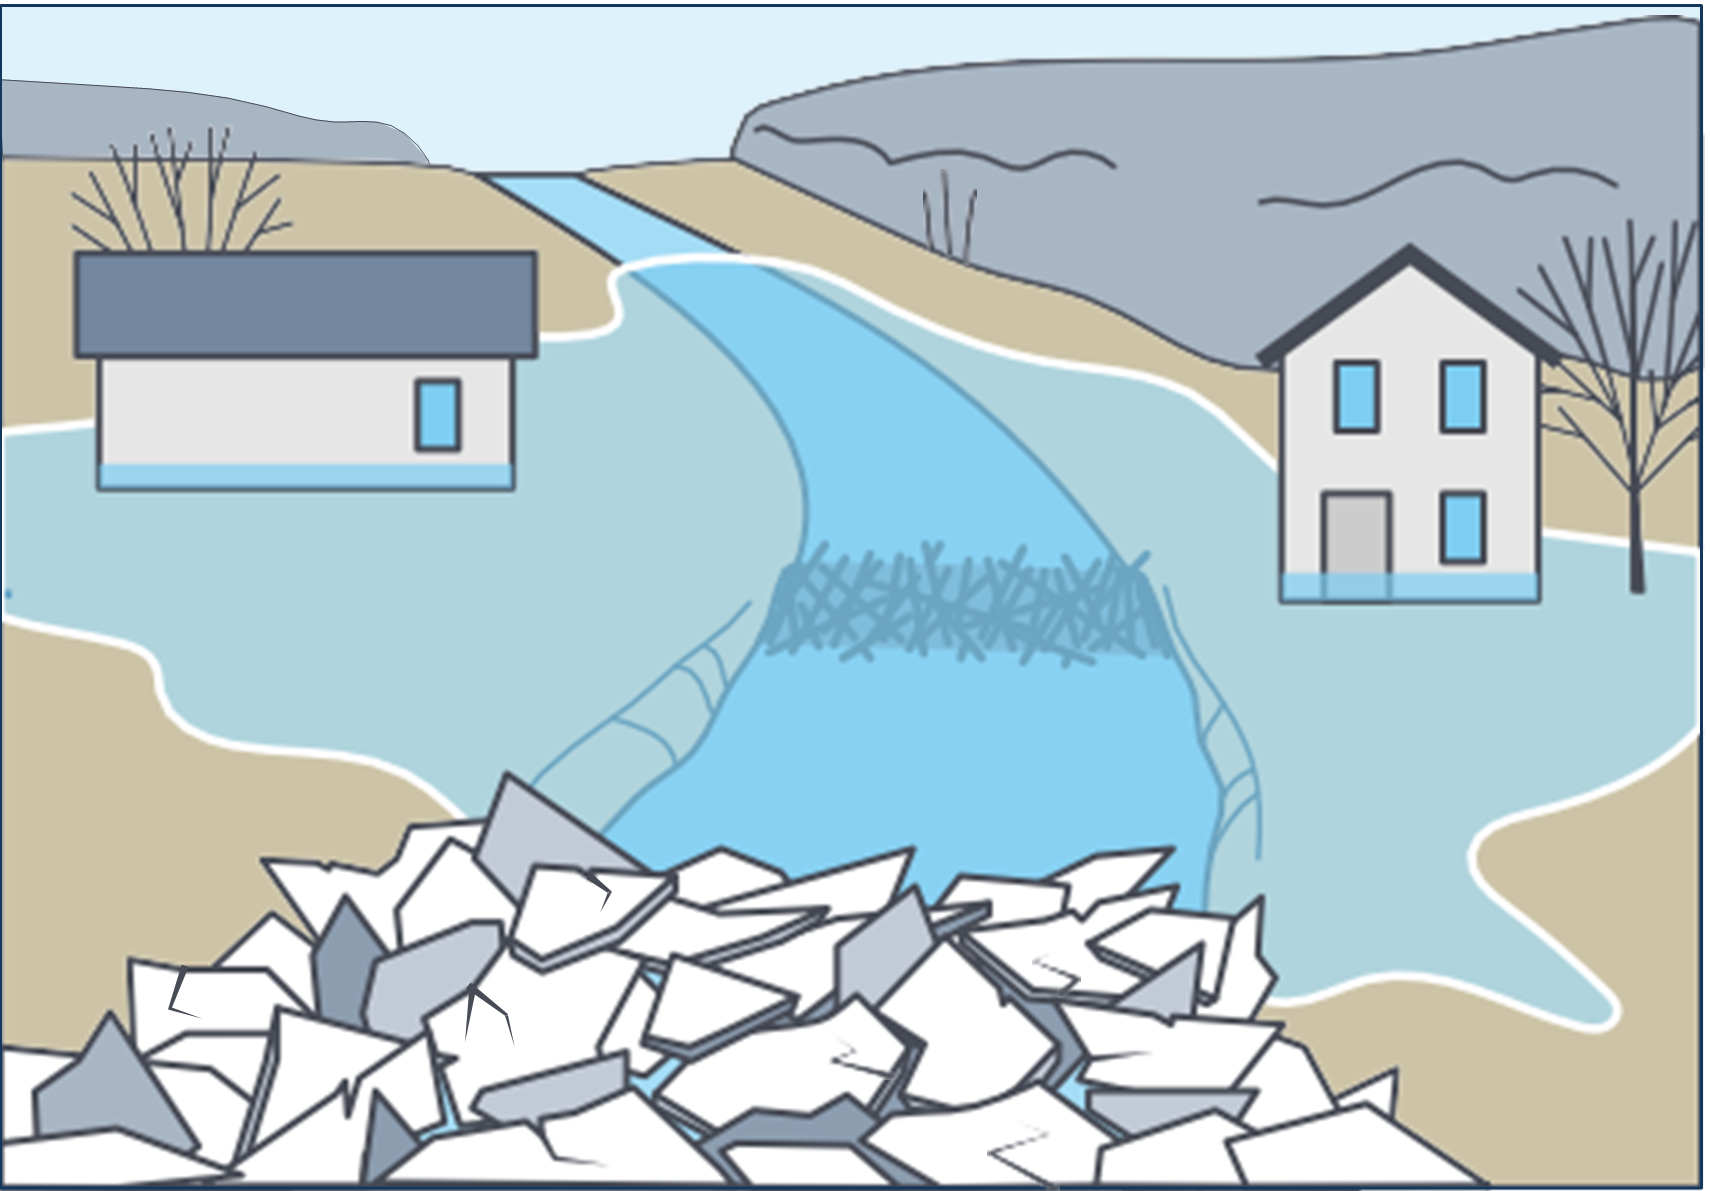 A river bank is shown with houses on either side. A large amount of ice at the bottom of the river is blocking the flow, and water is spilling onto the houses.